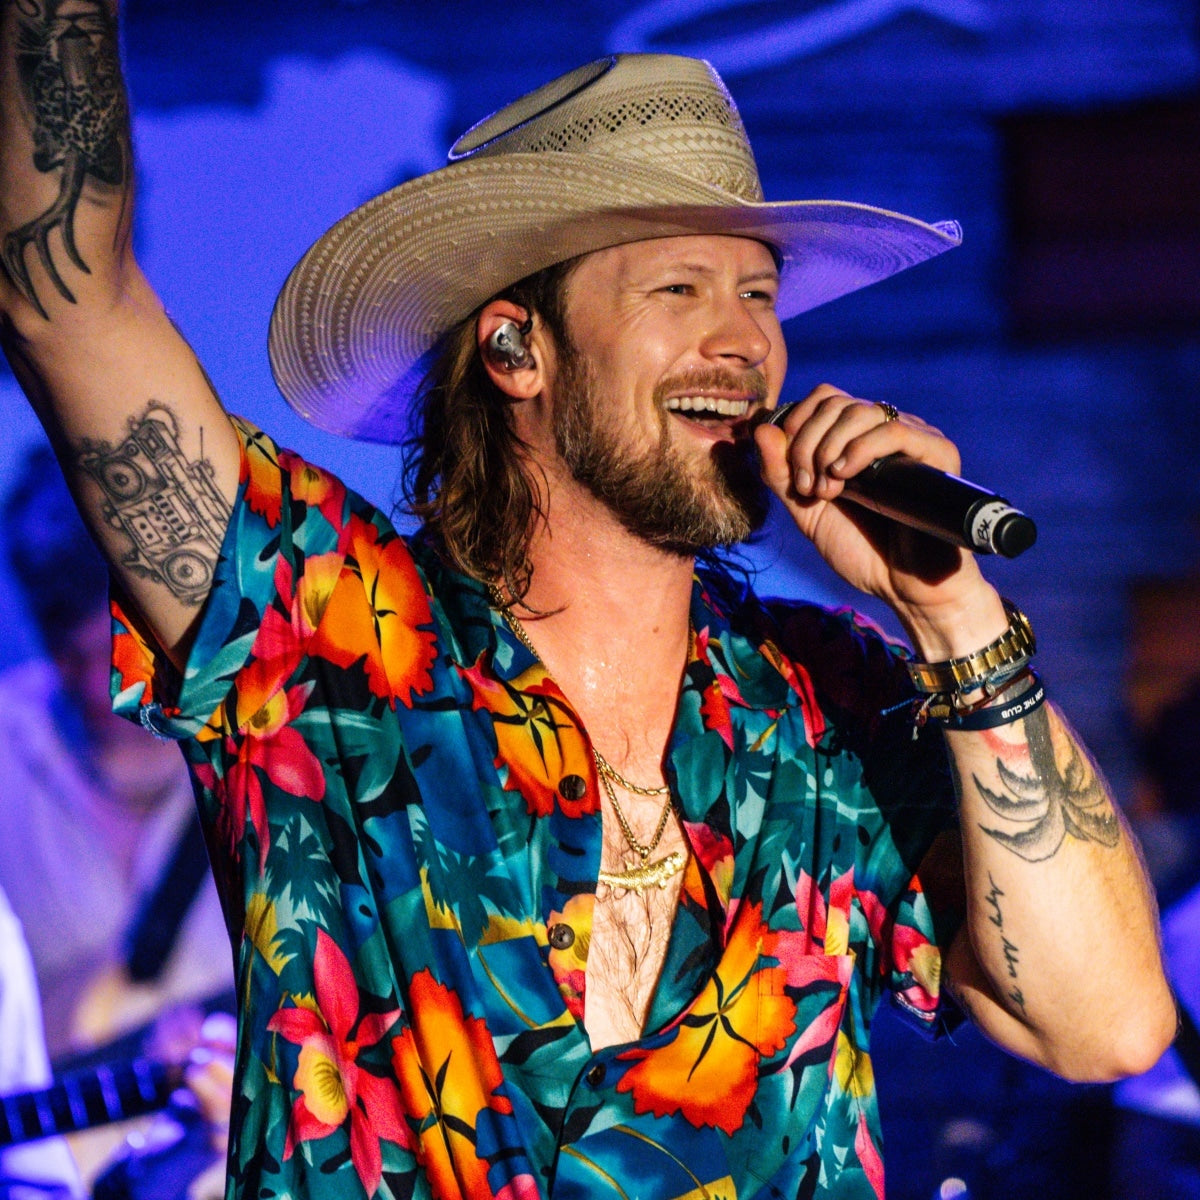 Brian Kelley teases new songs: “Saltwater Ranch” and “See You Next Summer”